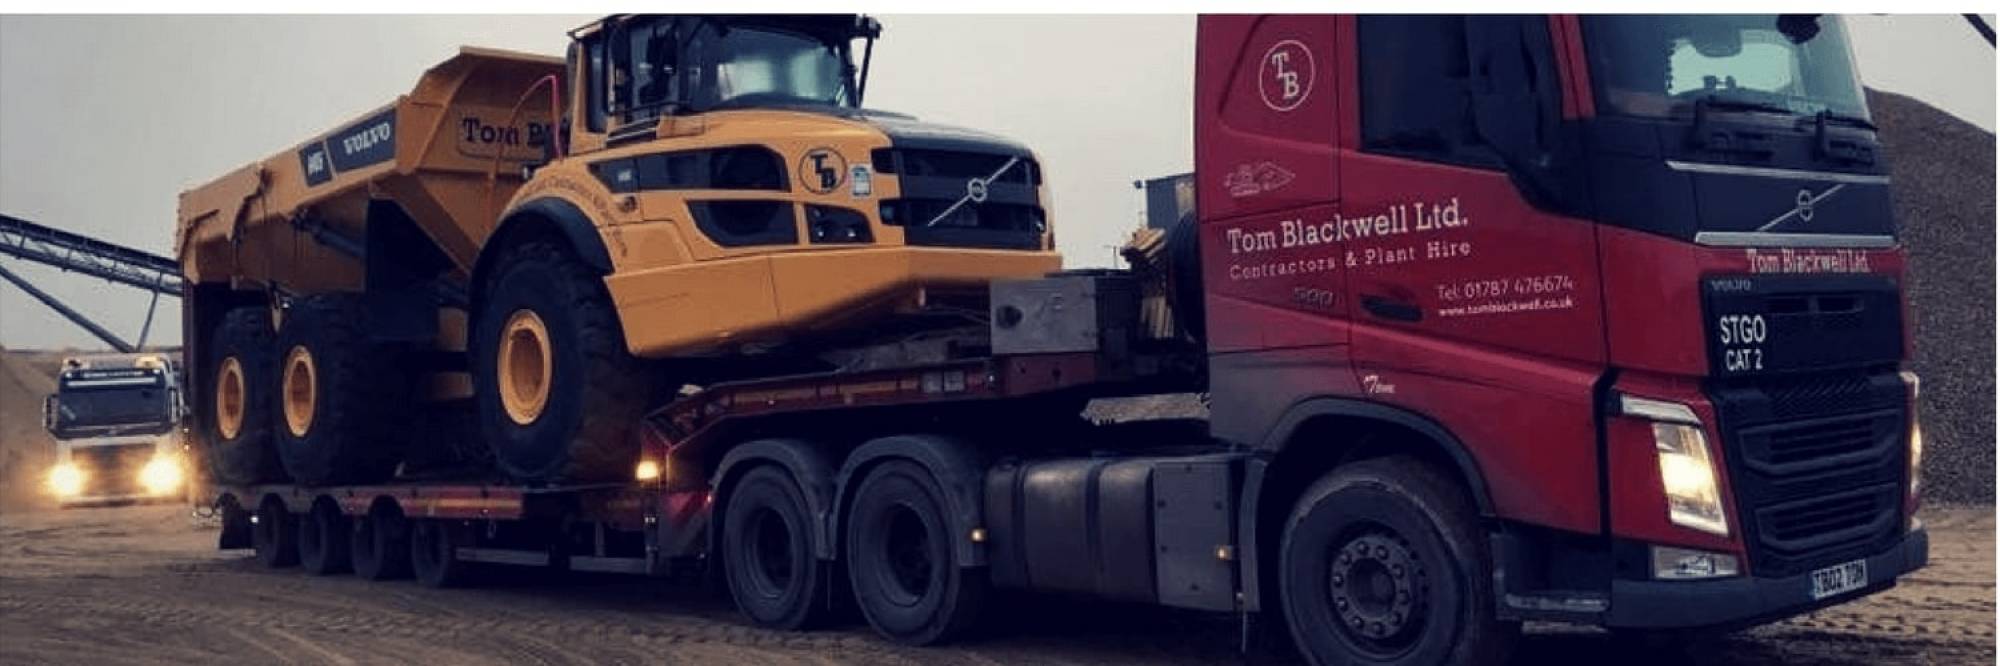 Heavy Haulage - Low Loader Hire